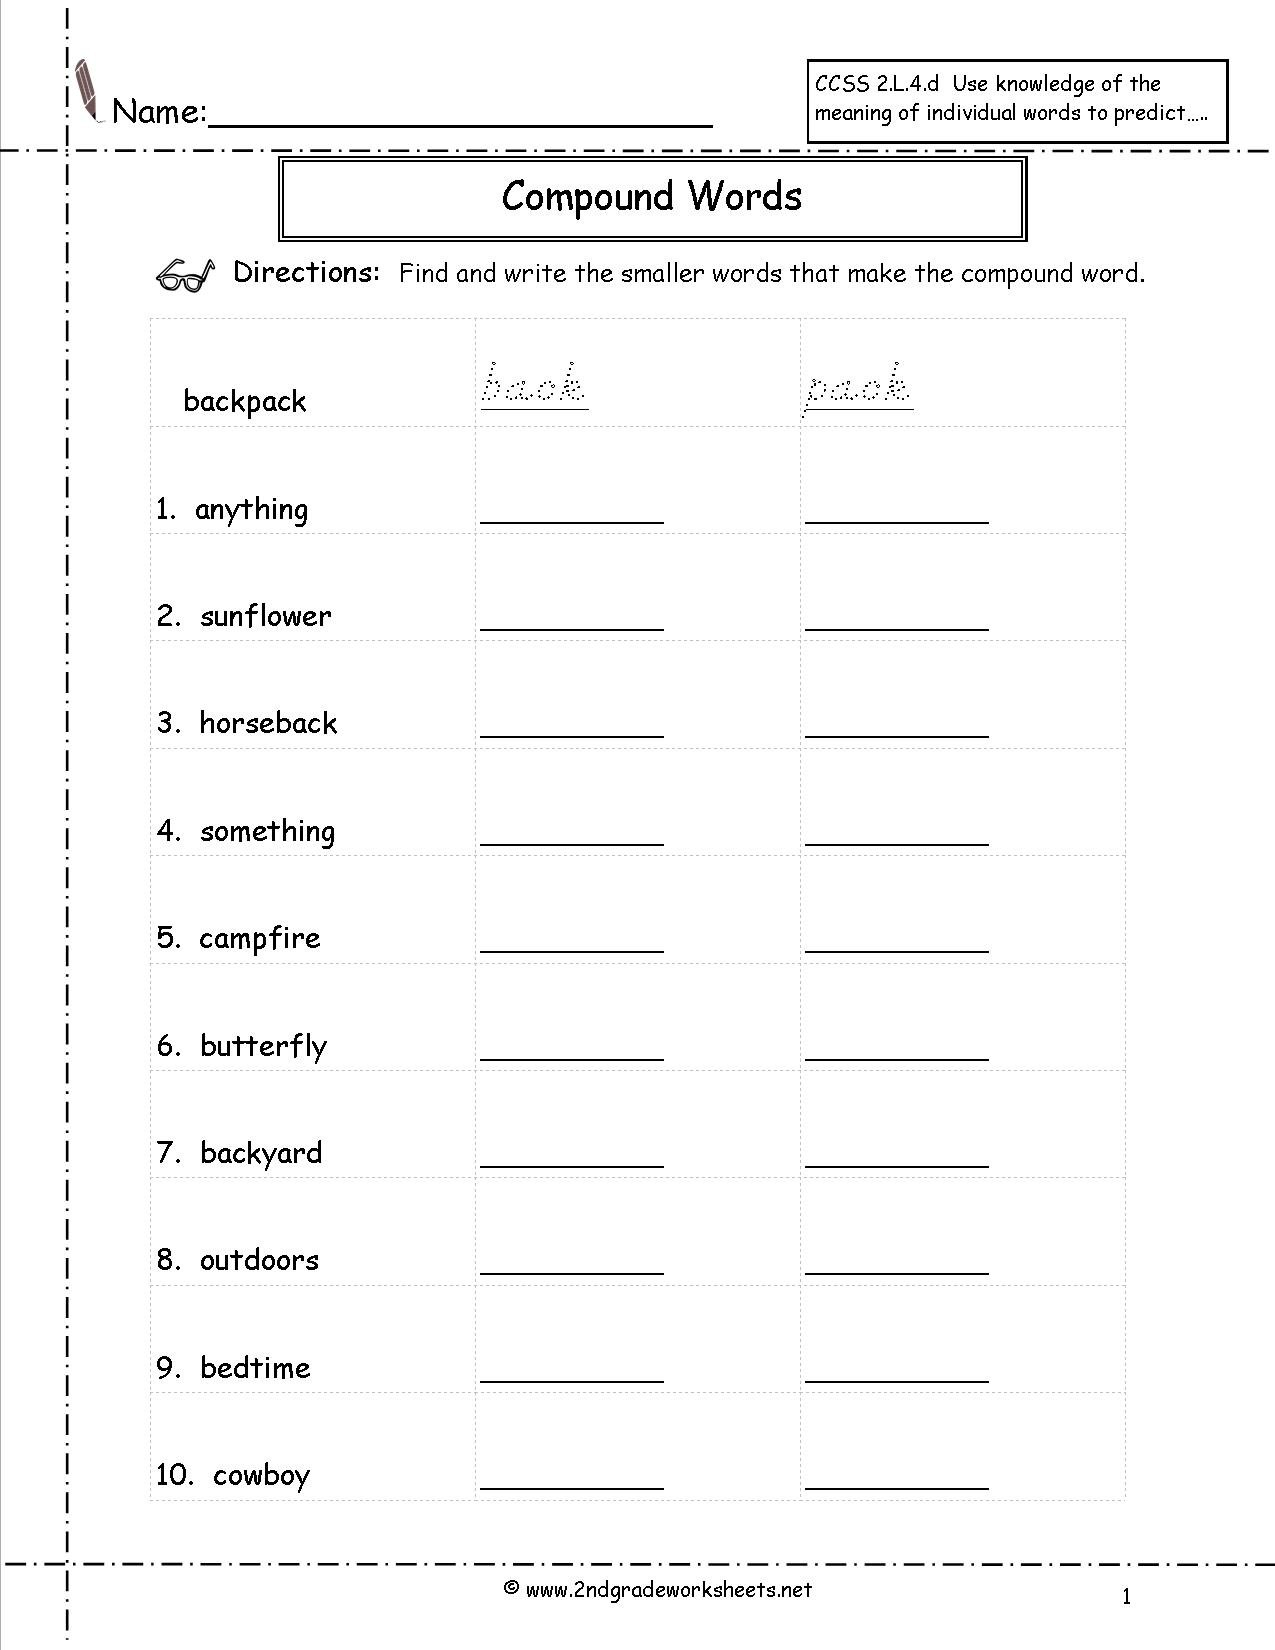 Free Languagegrammar Worksheets And Printouts For Second Grade Preparation Worksheets